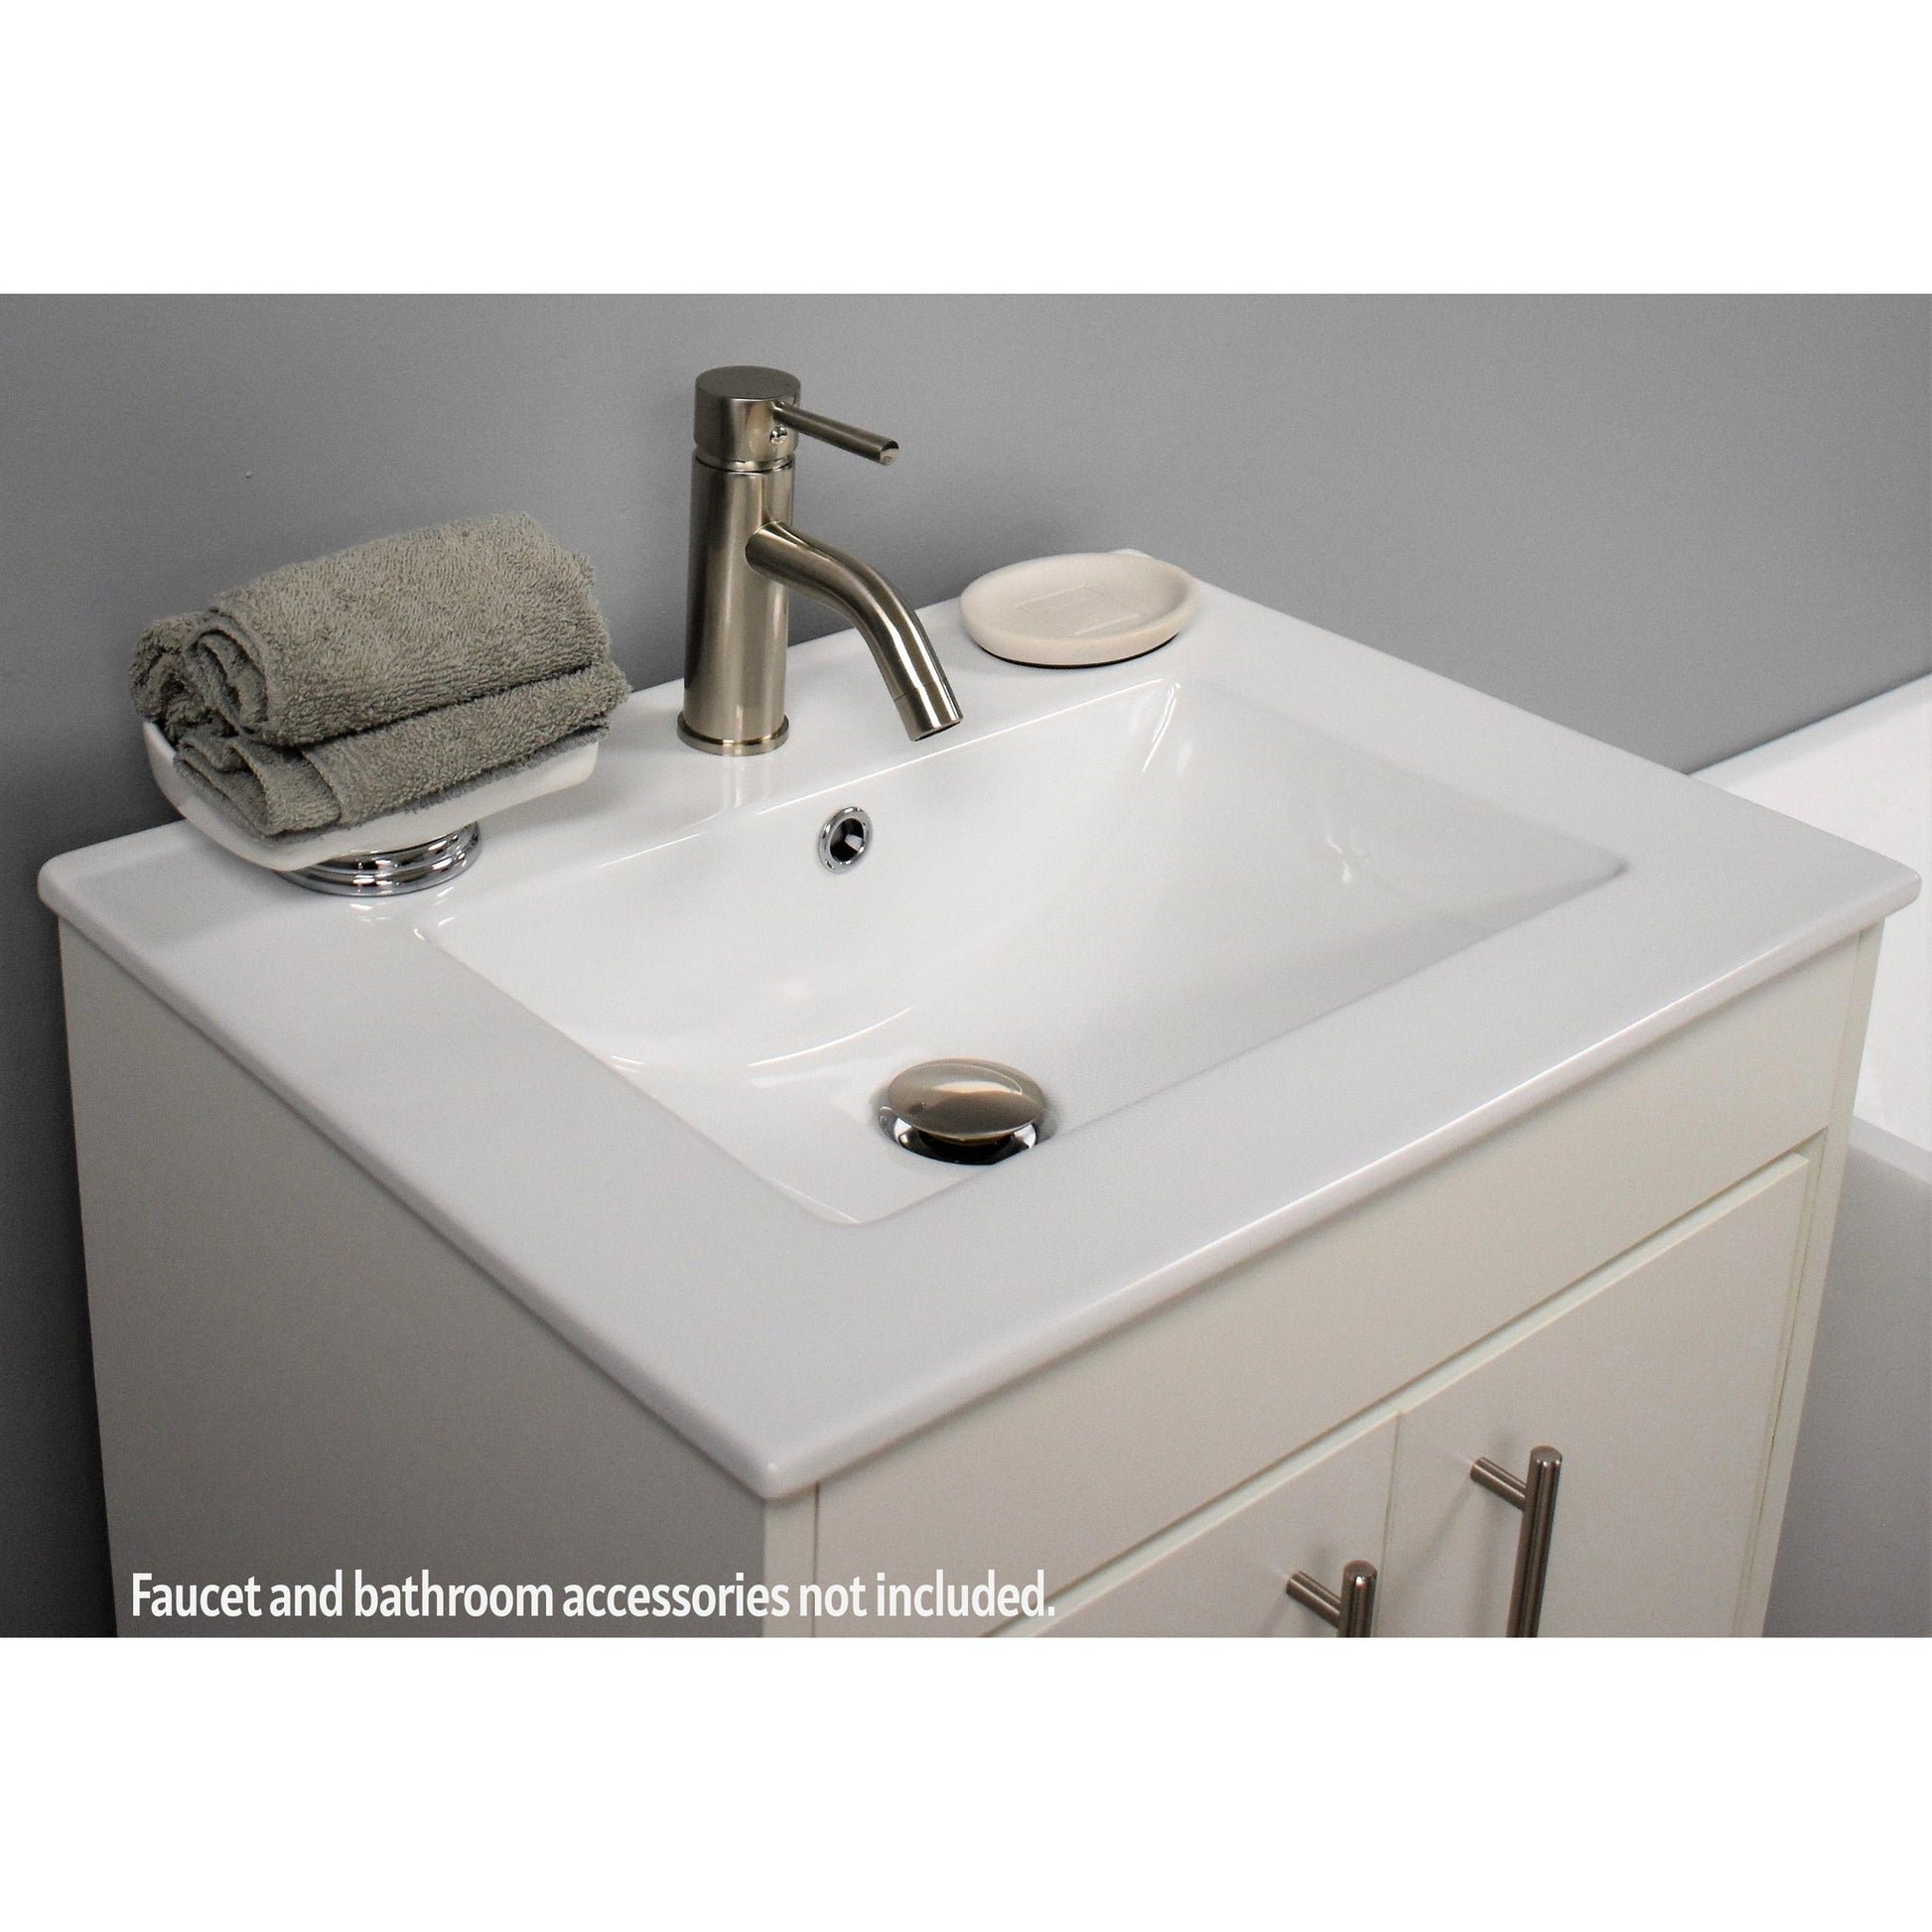 Volpa USA Pacific 24" Soft White Freestanding Modern Bathroom Vanity With Integrated Ceramic Top and Brushed Nickel Round Handles